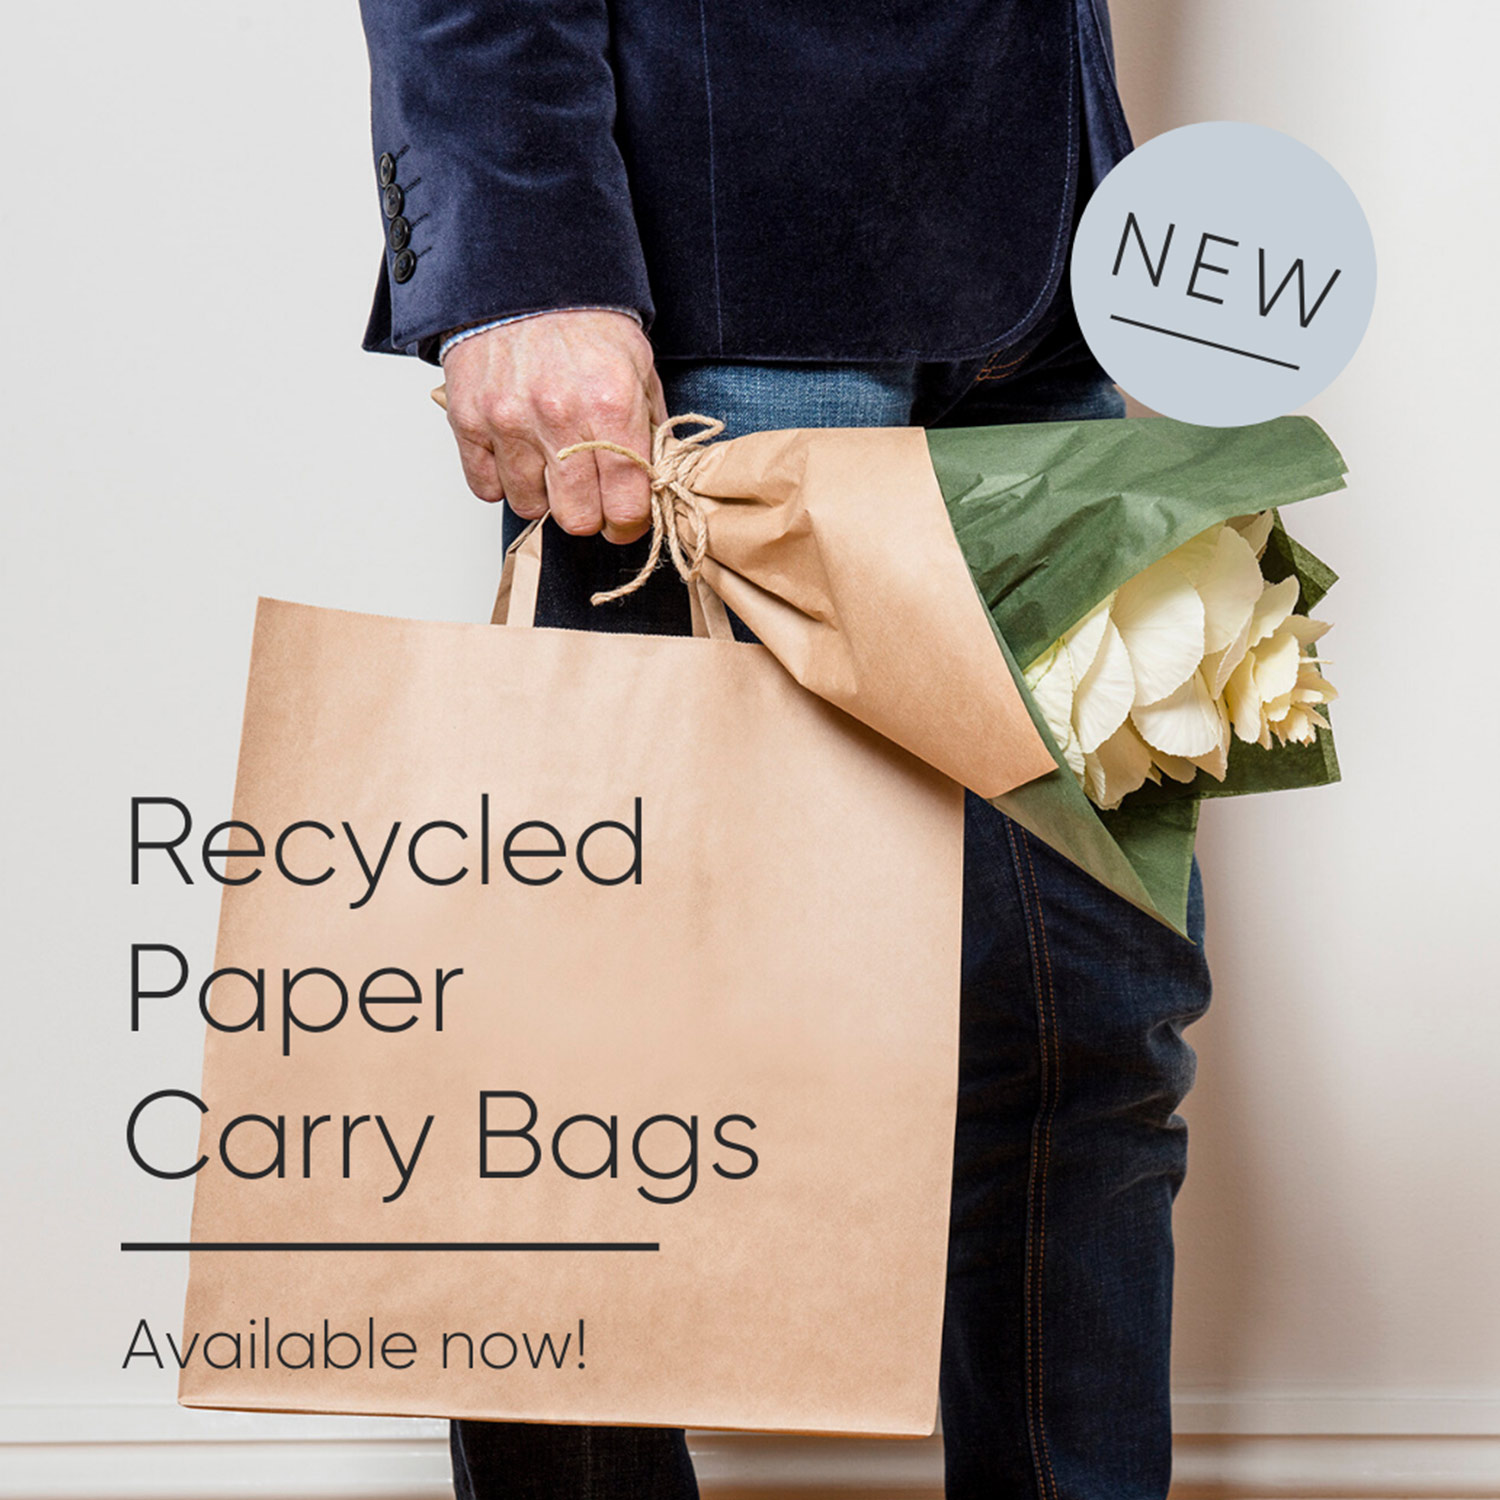 Image of a man carrying a paper bag with text "recycled paper carry bags" 